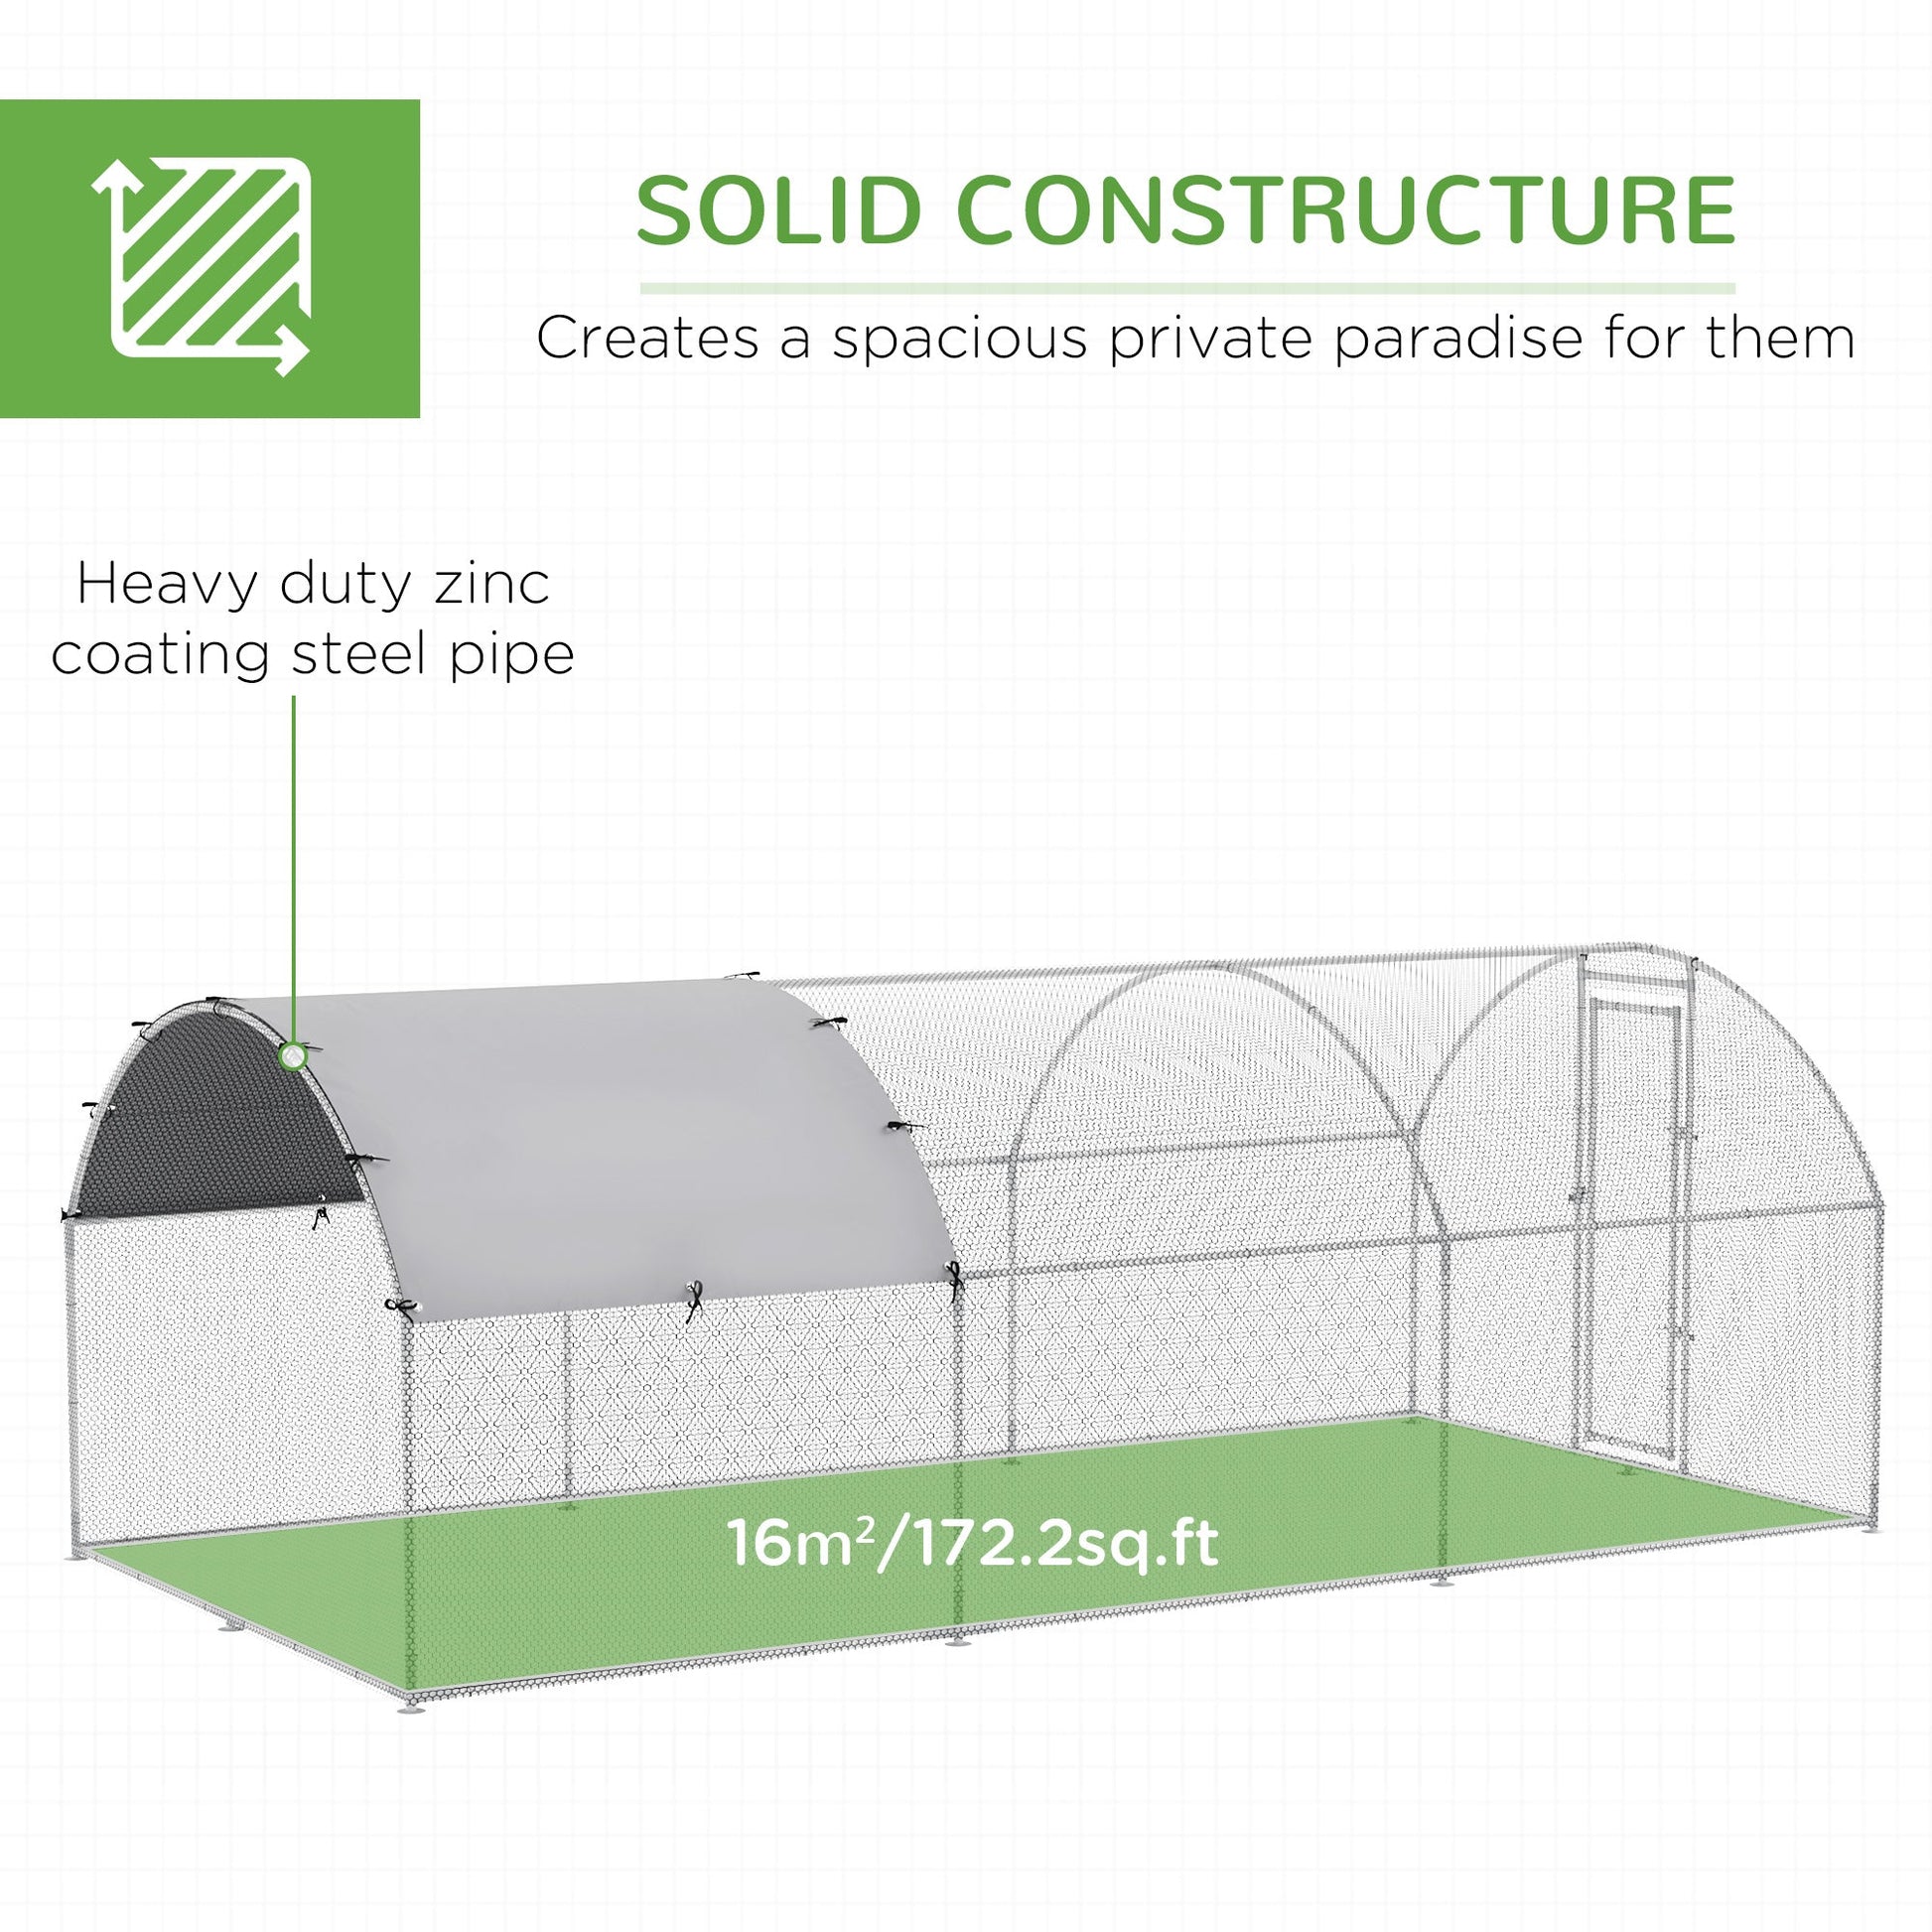 Galvanized Large Metal Chicken Coop Cage Walk-in Enclosure Poultry Hen Run House Playpen Rabbit Hutch with Cover for Outdoor Backyard 9.2' x 18.7' x 6.5' Silver at Gallery Canada